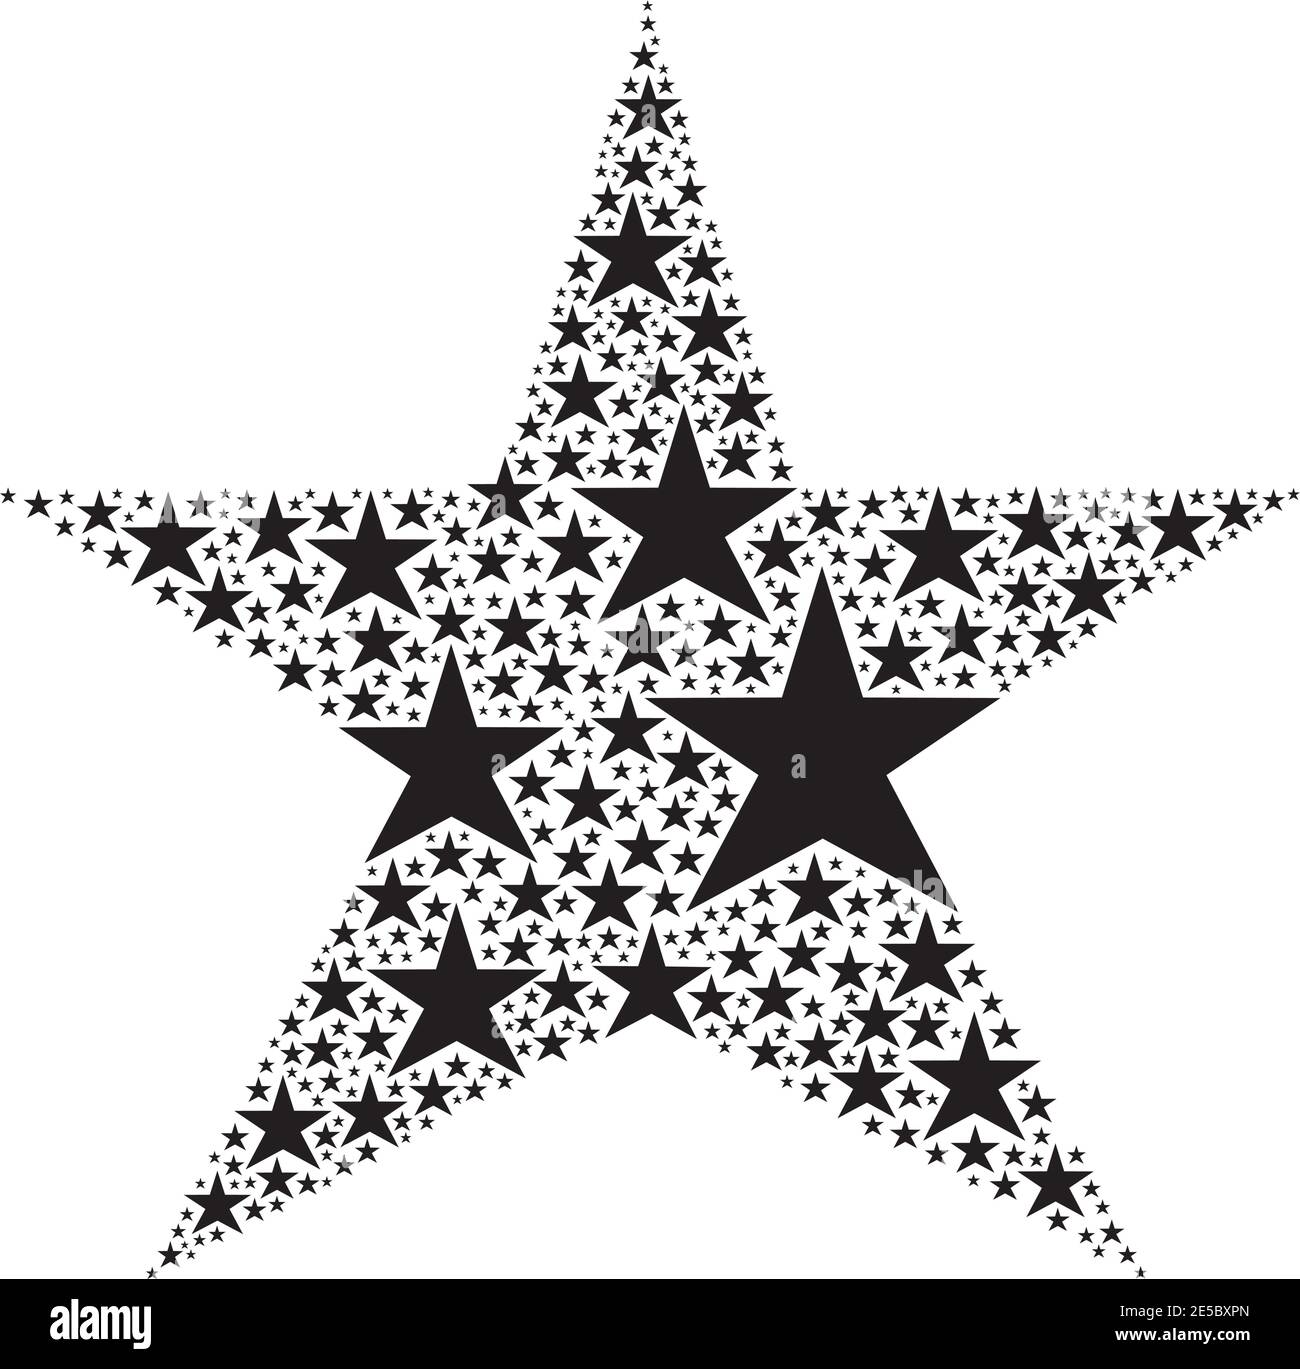 Big Star High Resolution Stock Photography and Images - Alamy